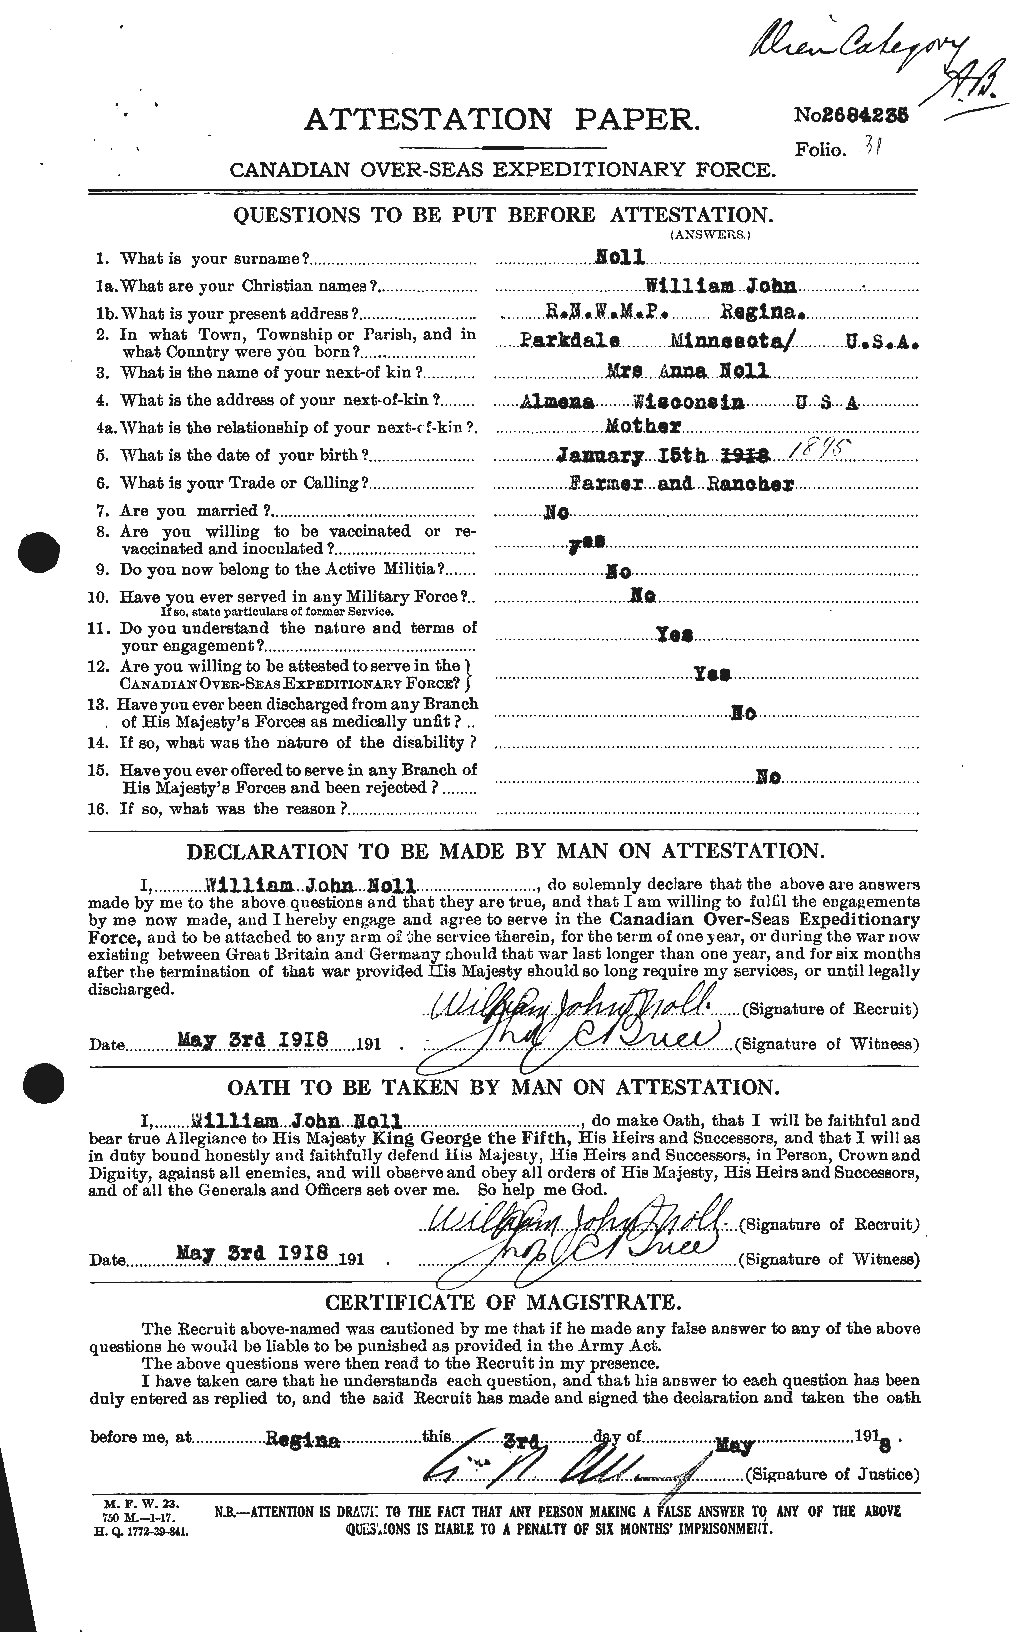 Personnel Records of the First World War - CEF 550055a